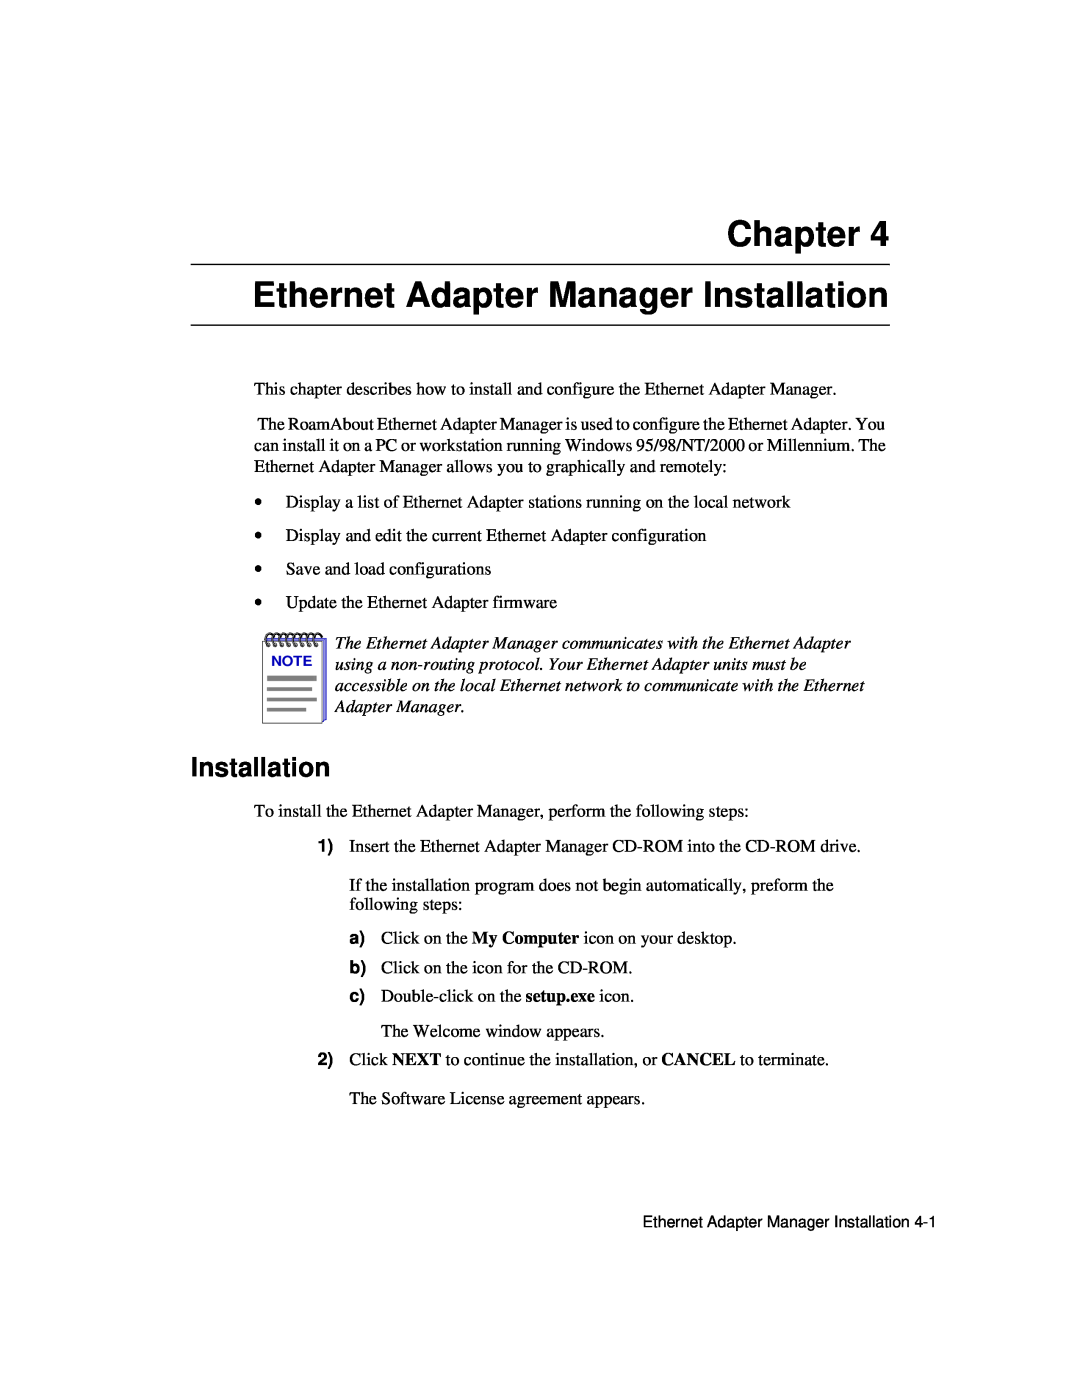 Enterasys Networks Wireless Ethernet Adapter I manual Chapter Ethernet Adapter Manager Installation 